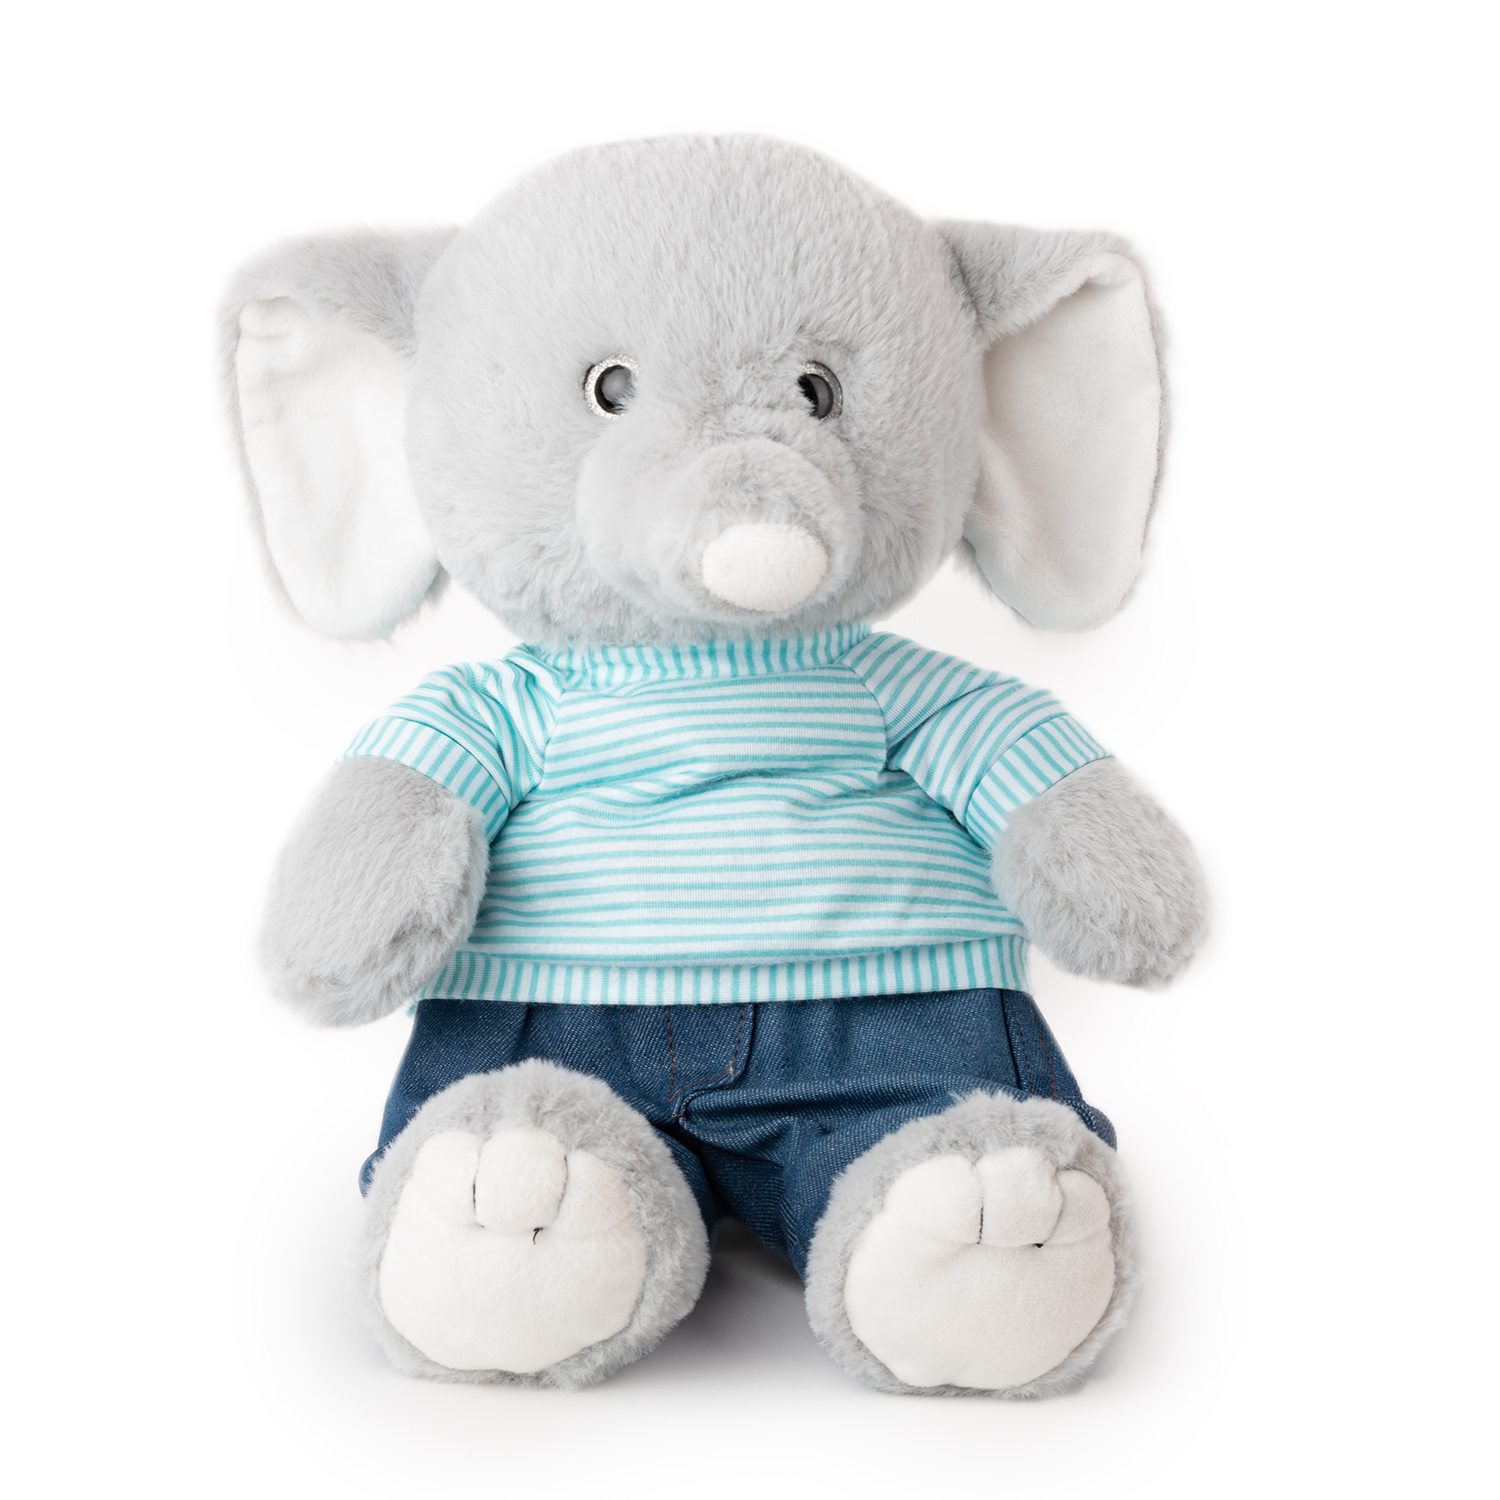 Elephant with jeans and a T-shirt